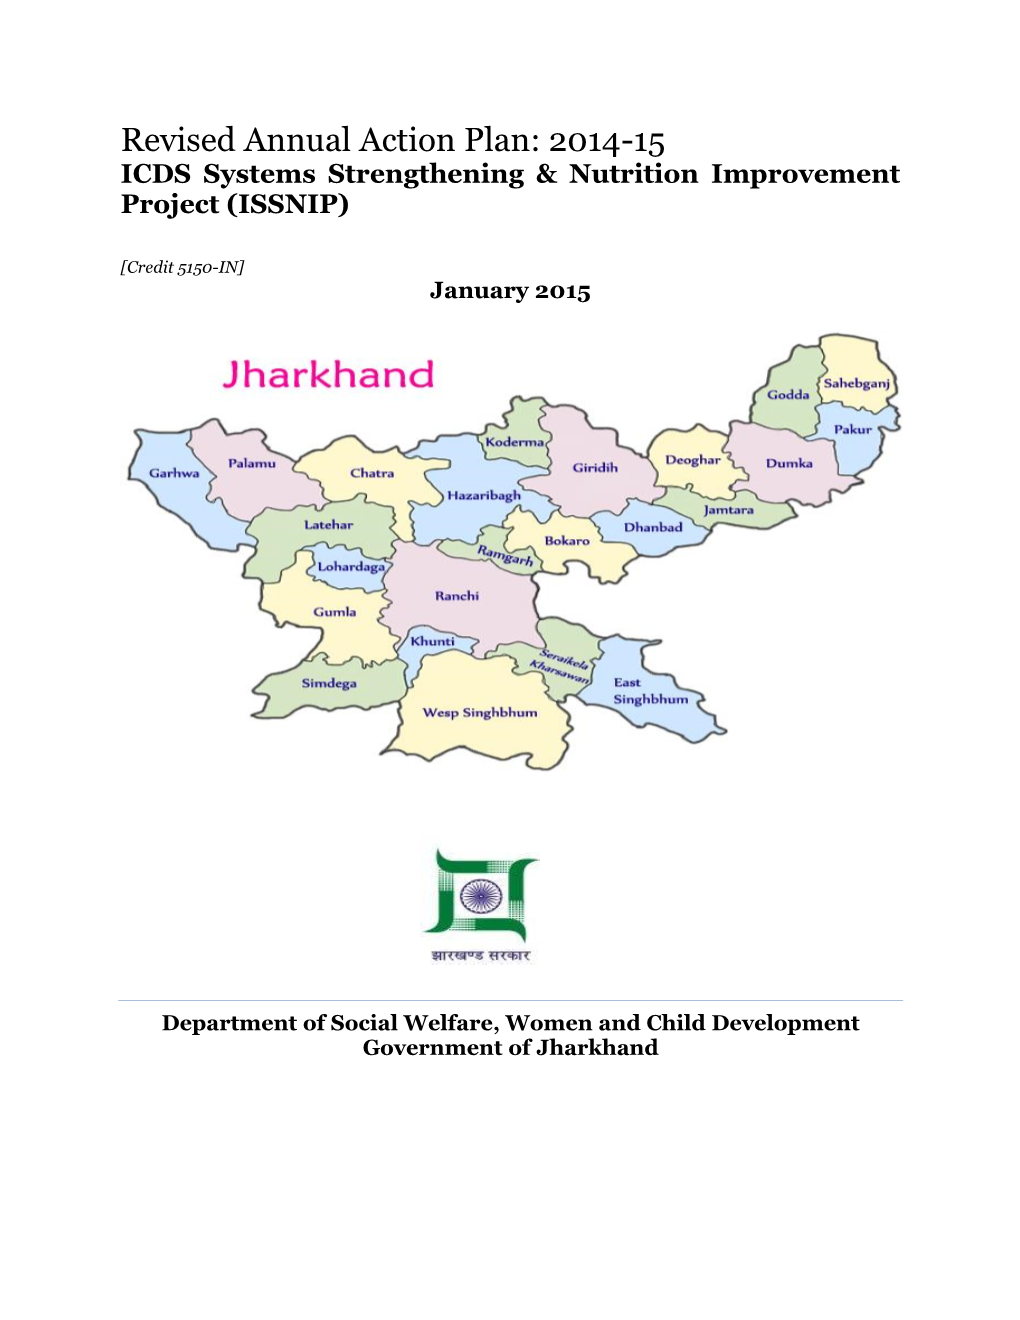 Revised Annual Action Plan: 2014-15 ICDS Systems Strengthening & Nutrition Improvement Project (ISSNIP)